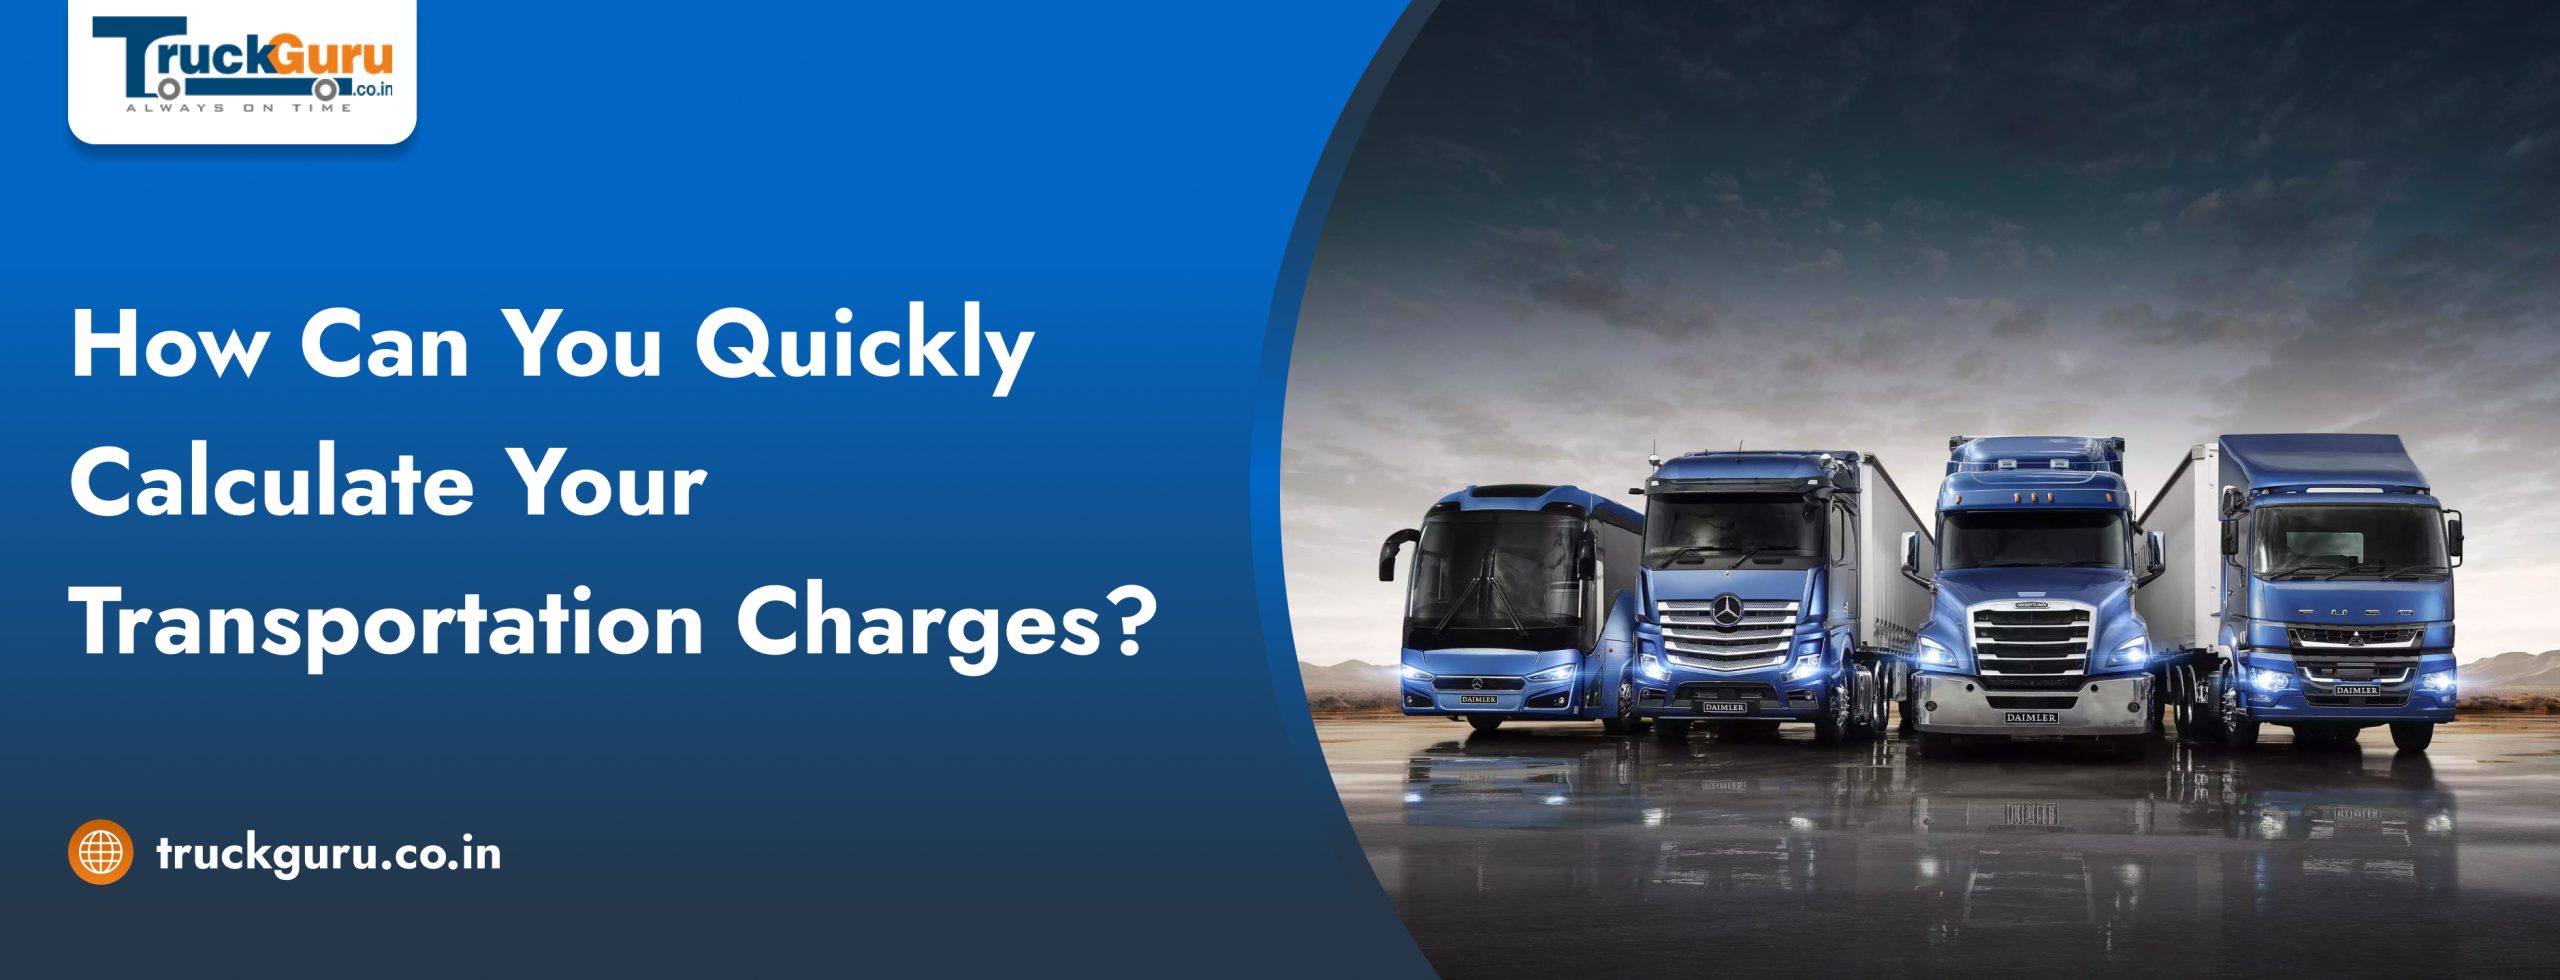 How Can You Quickly Calculate Your Transportation Charges?